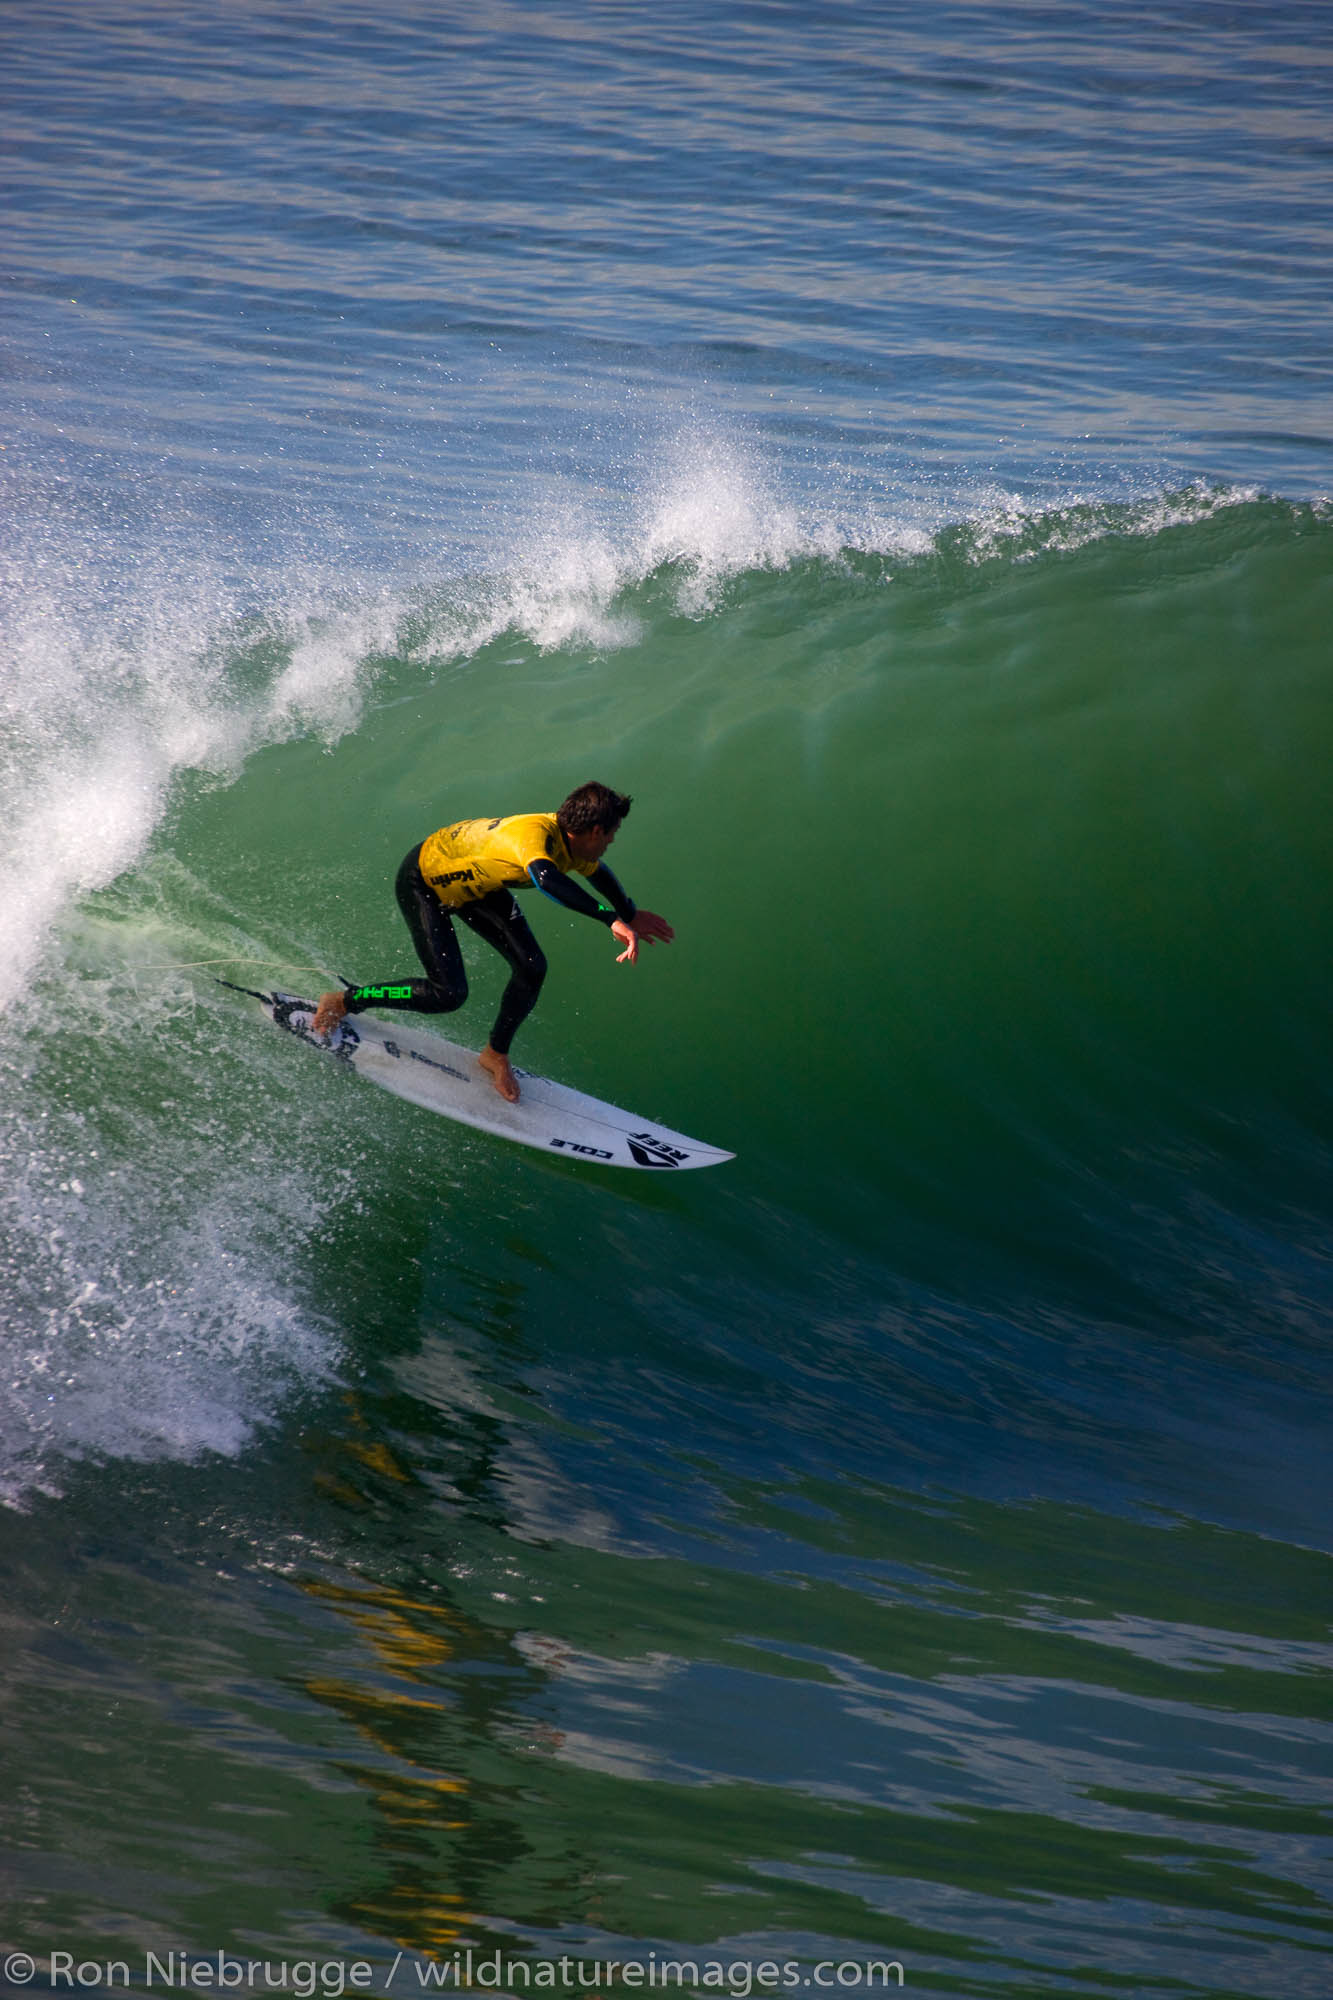 Teddy Navarro competing in the Katin Pro/Am surf competition at Huntington Beach Pier, Orange County, California.